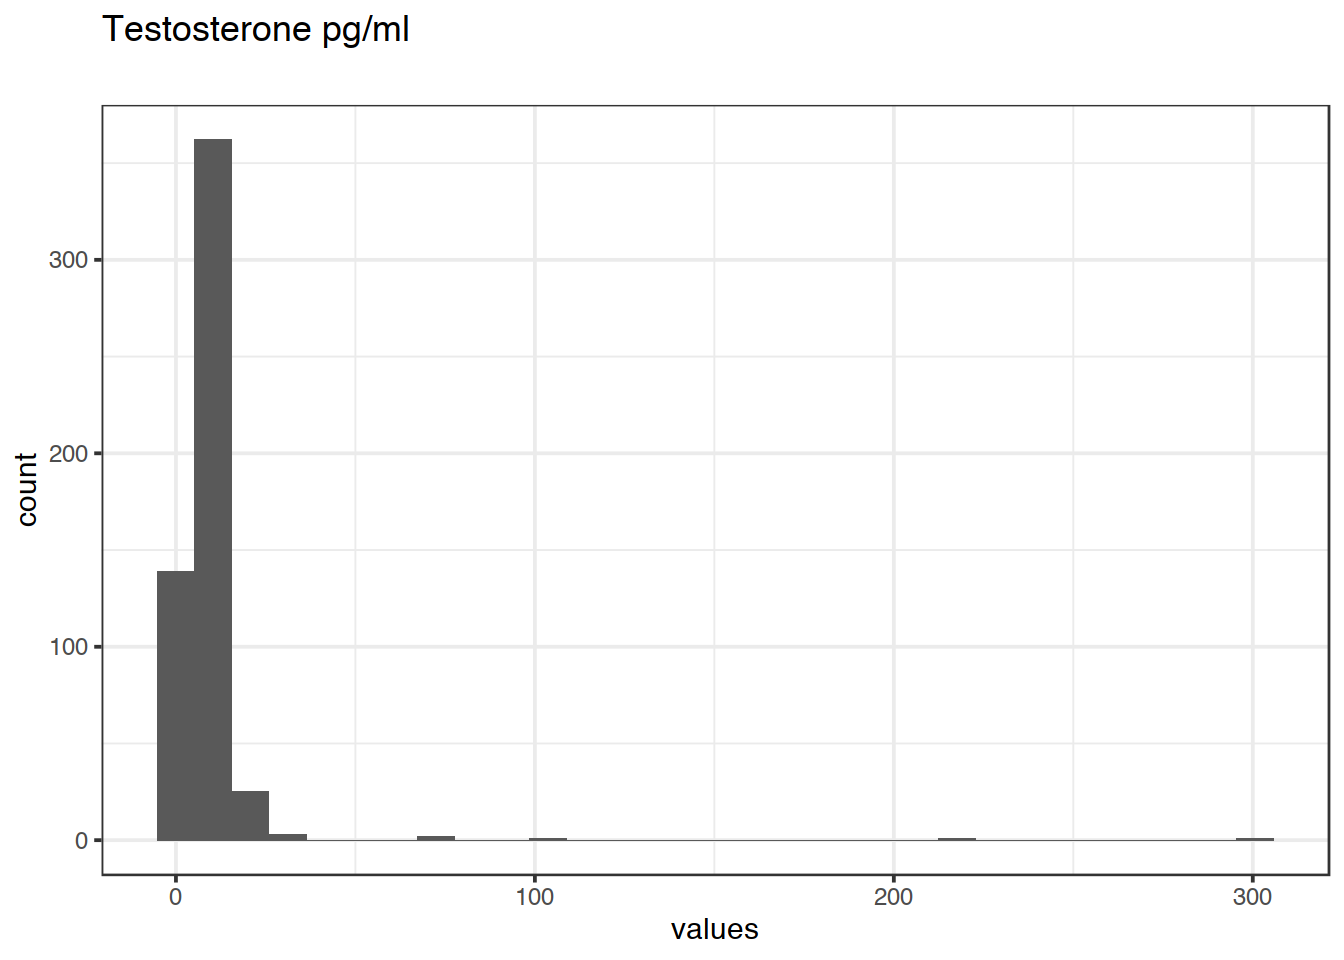 Distribution of values for Testosterone pg/ml